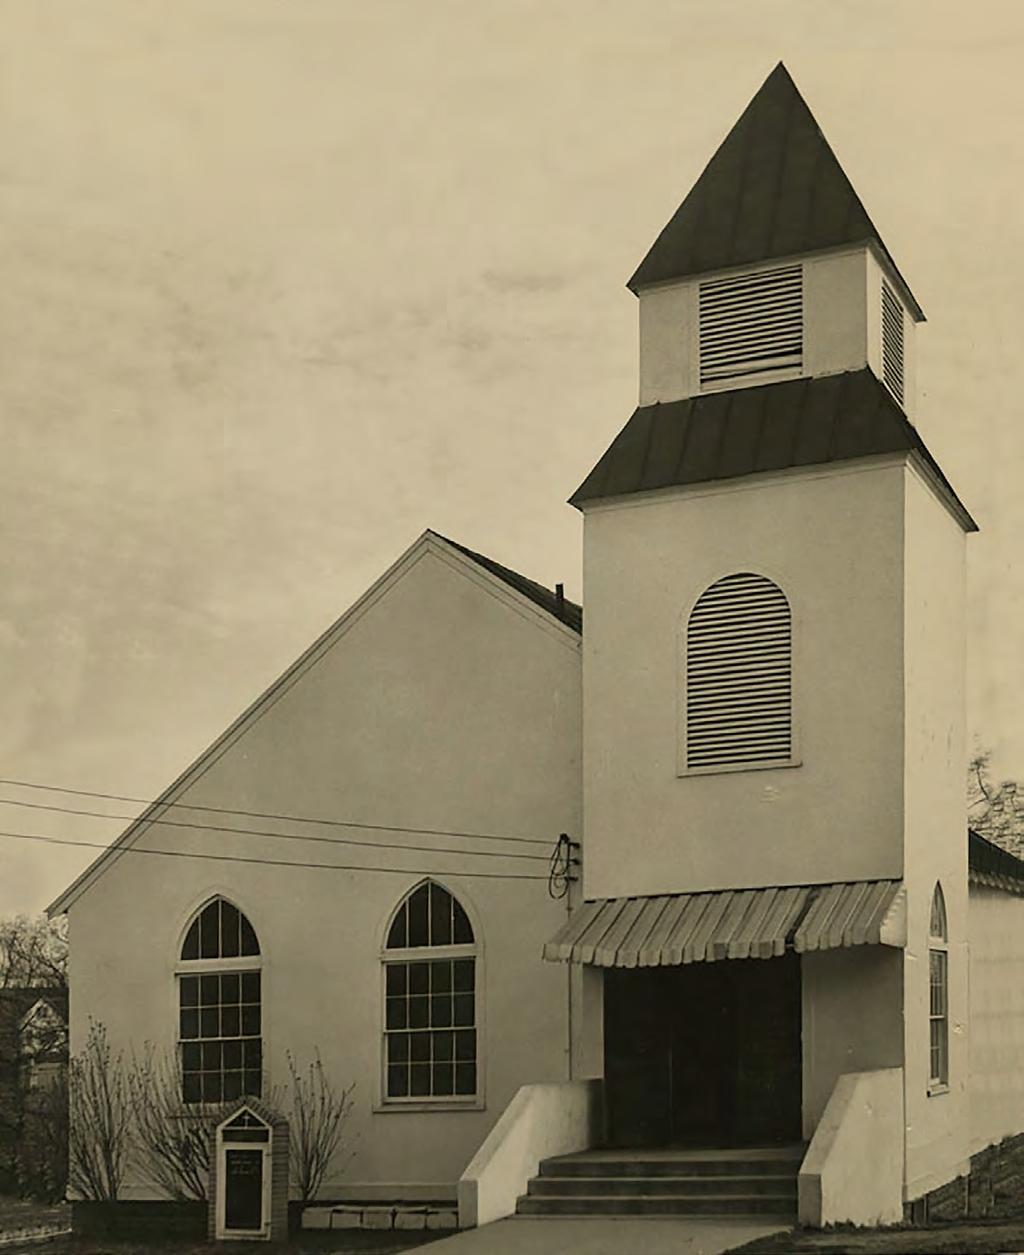 Through a history of multiple structures and locations, the church persevered building on its current site in Nauck in 1945.